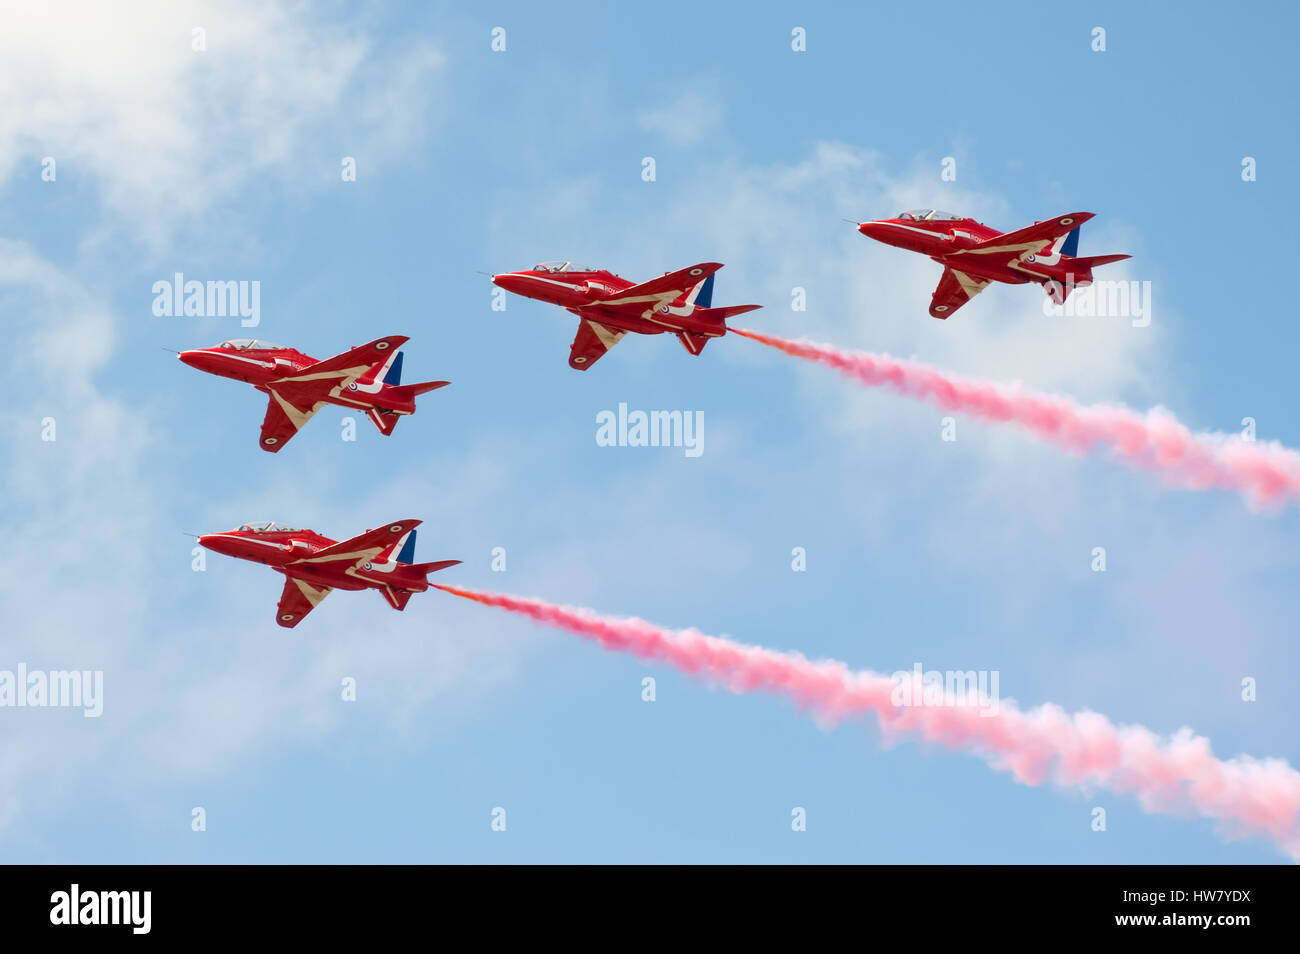 Farnborough, UK - July 15, 2010: Formation flying by part of the Red Arrows aerobatic display team during the Farnborough International Airshow, UK Stock Photo